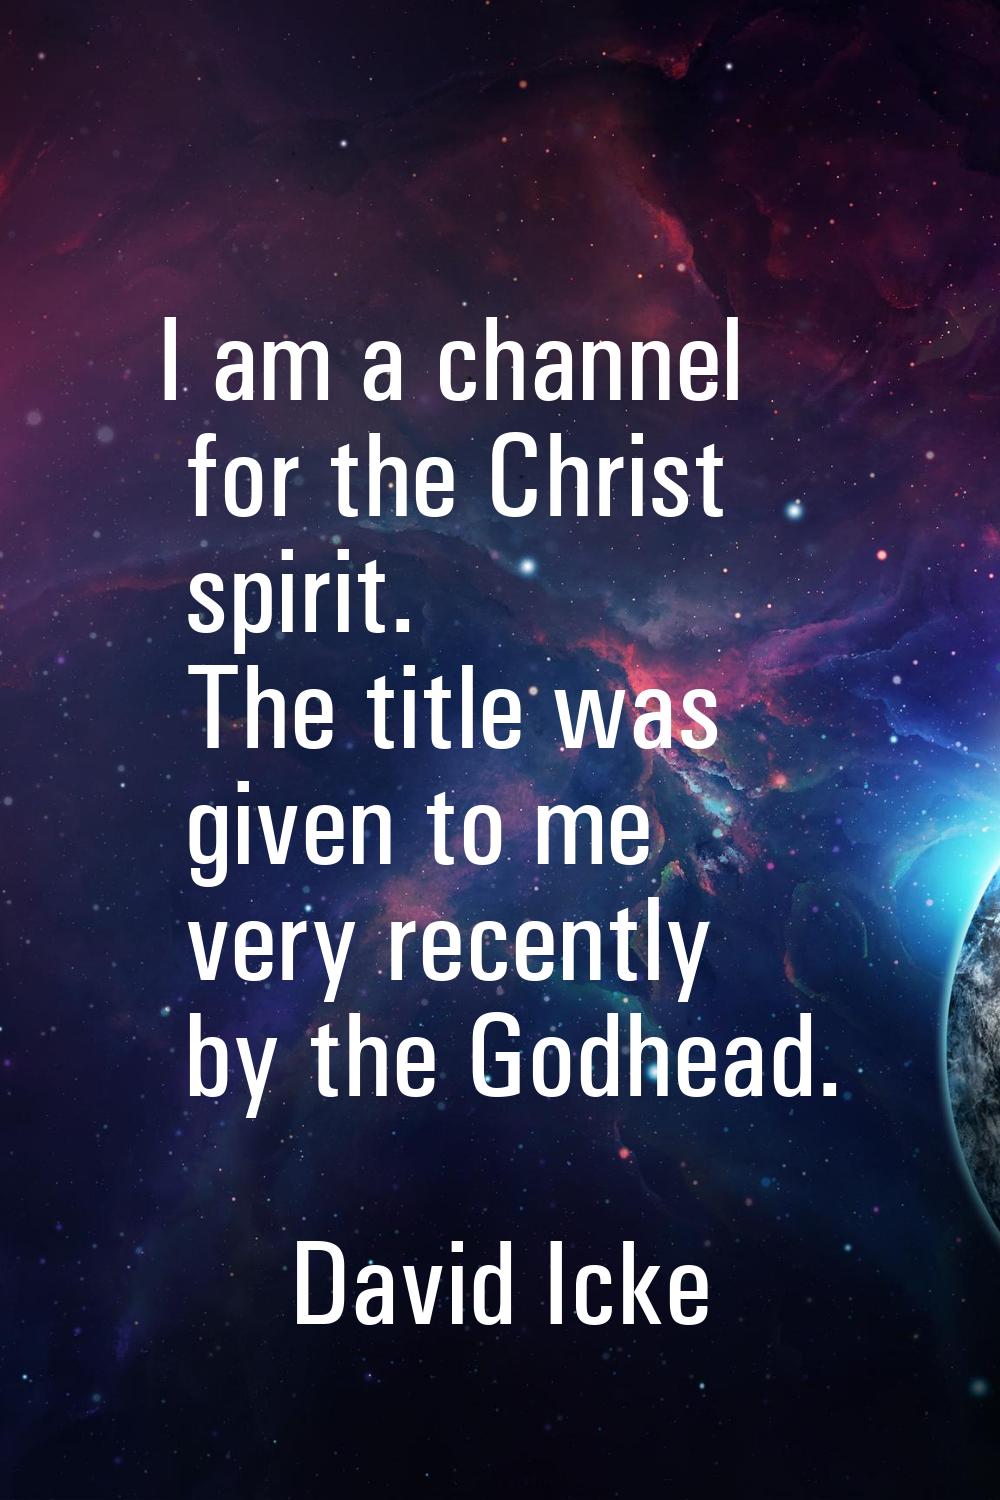 I am a channel for the Christ spirit. The title was given to me very recently by the Godhead.